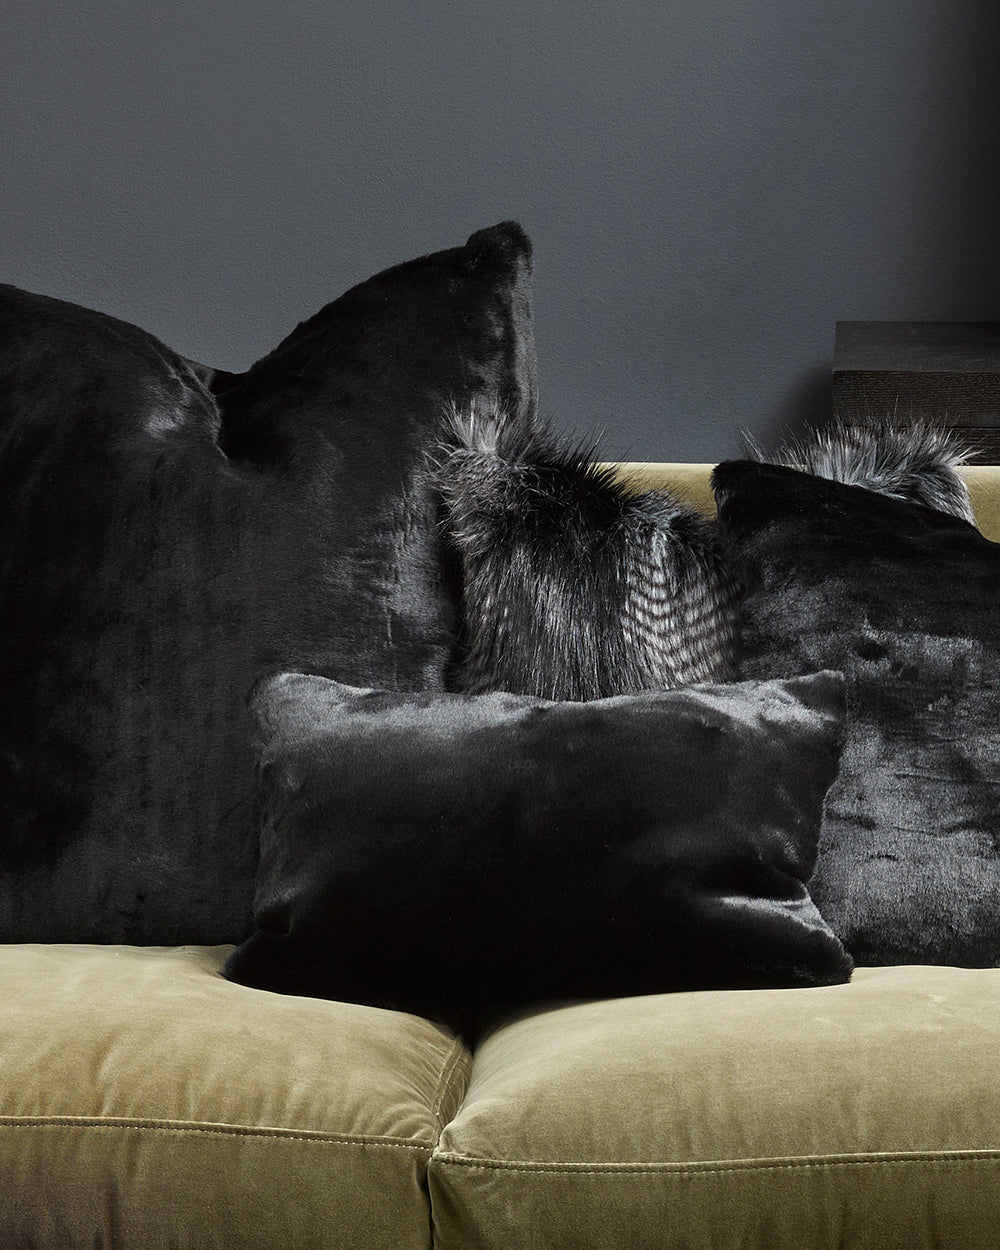 Heirloom Black Panther Cushions in Faux Fur are available from Make Your House A Home Premium Stockist. Furniture Store Bendigo, Victoria. Australia Wide Delivery. Furtex Baya.